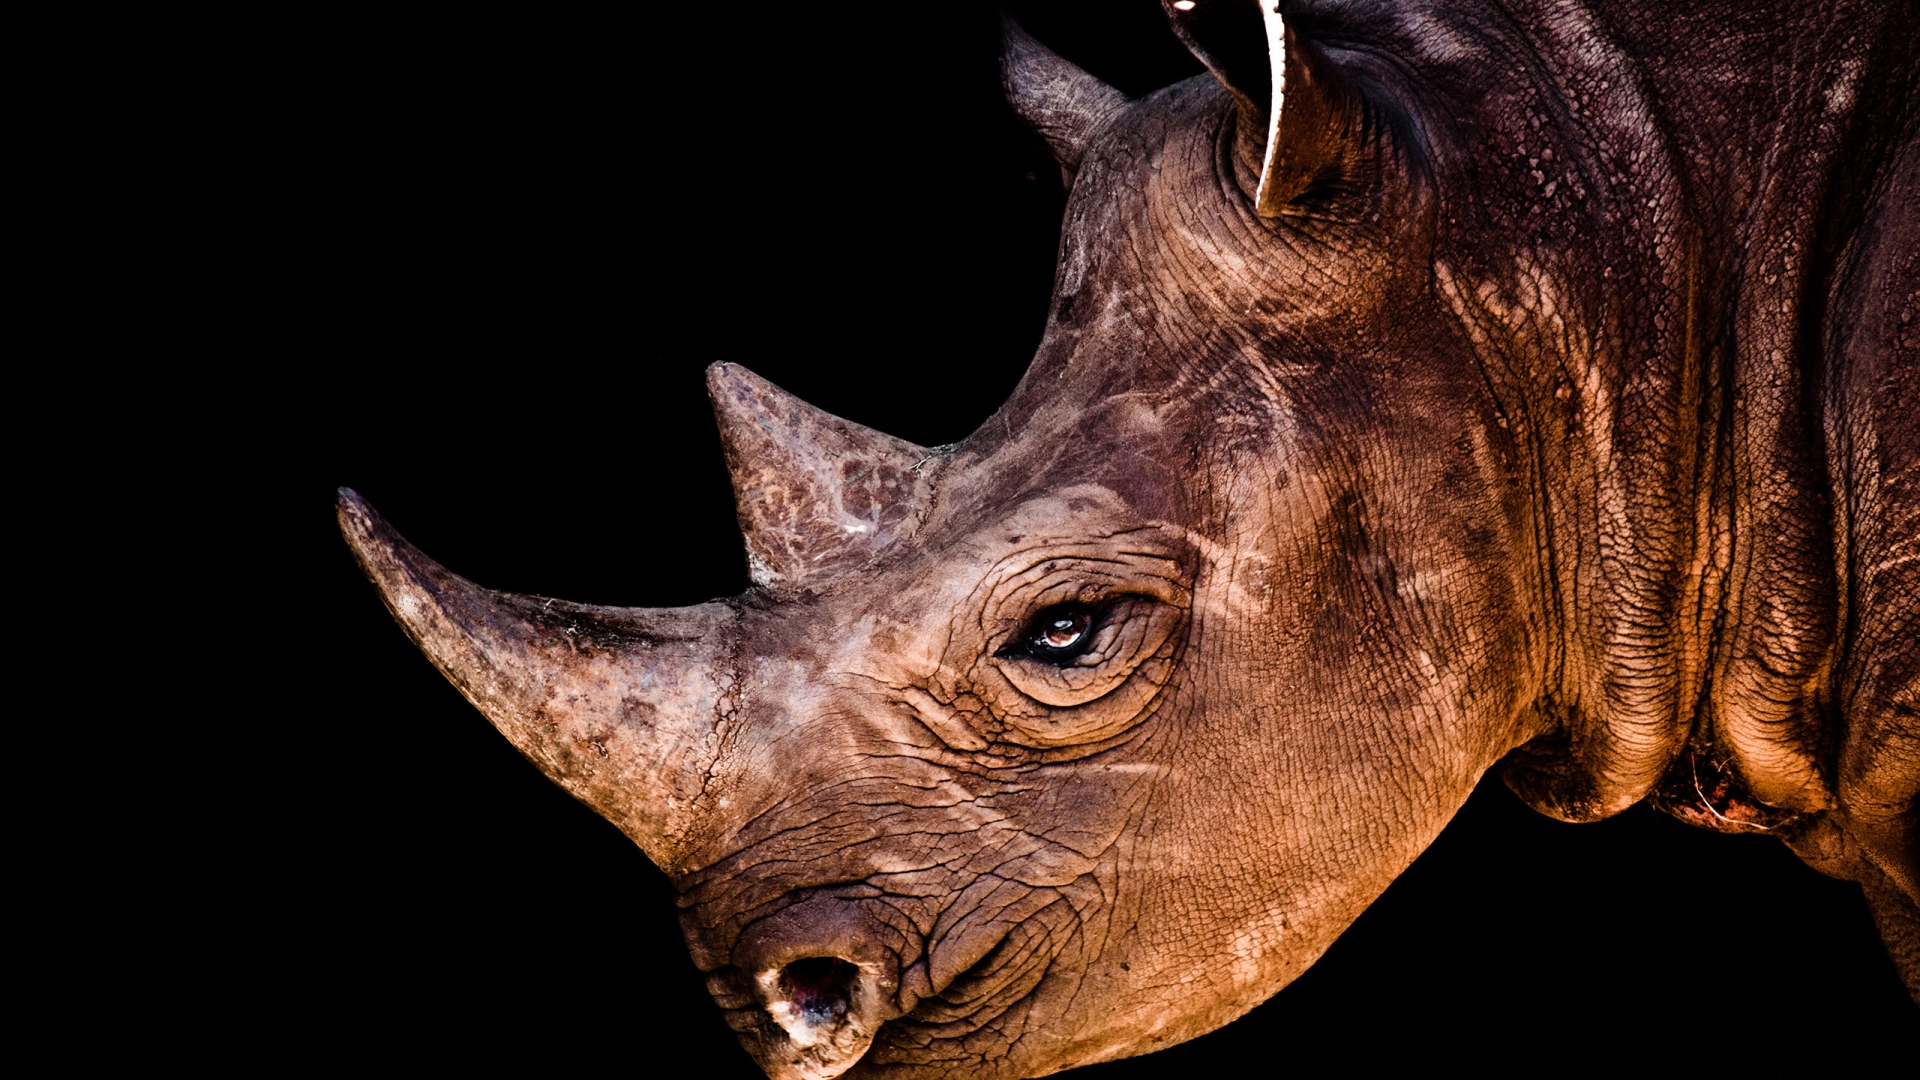 Rhino Face for 1920 x 1080 HDTV 1080p resolution